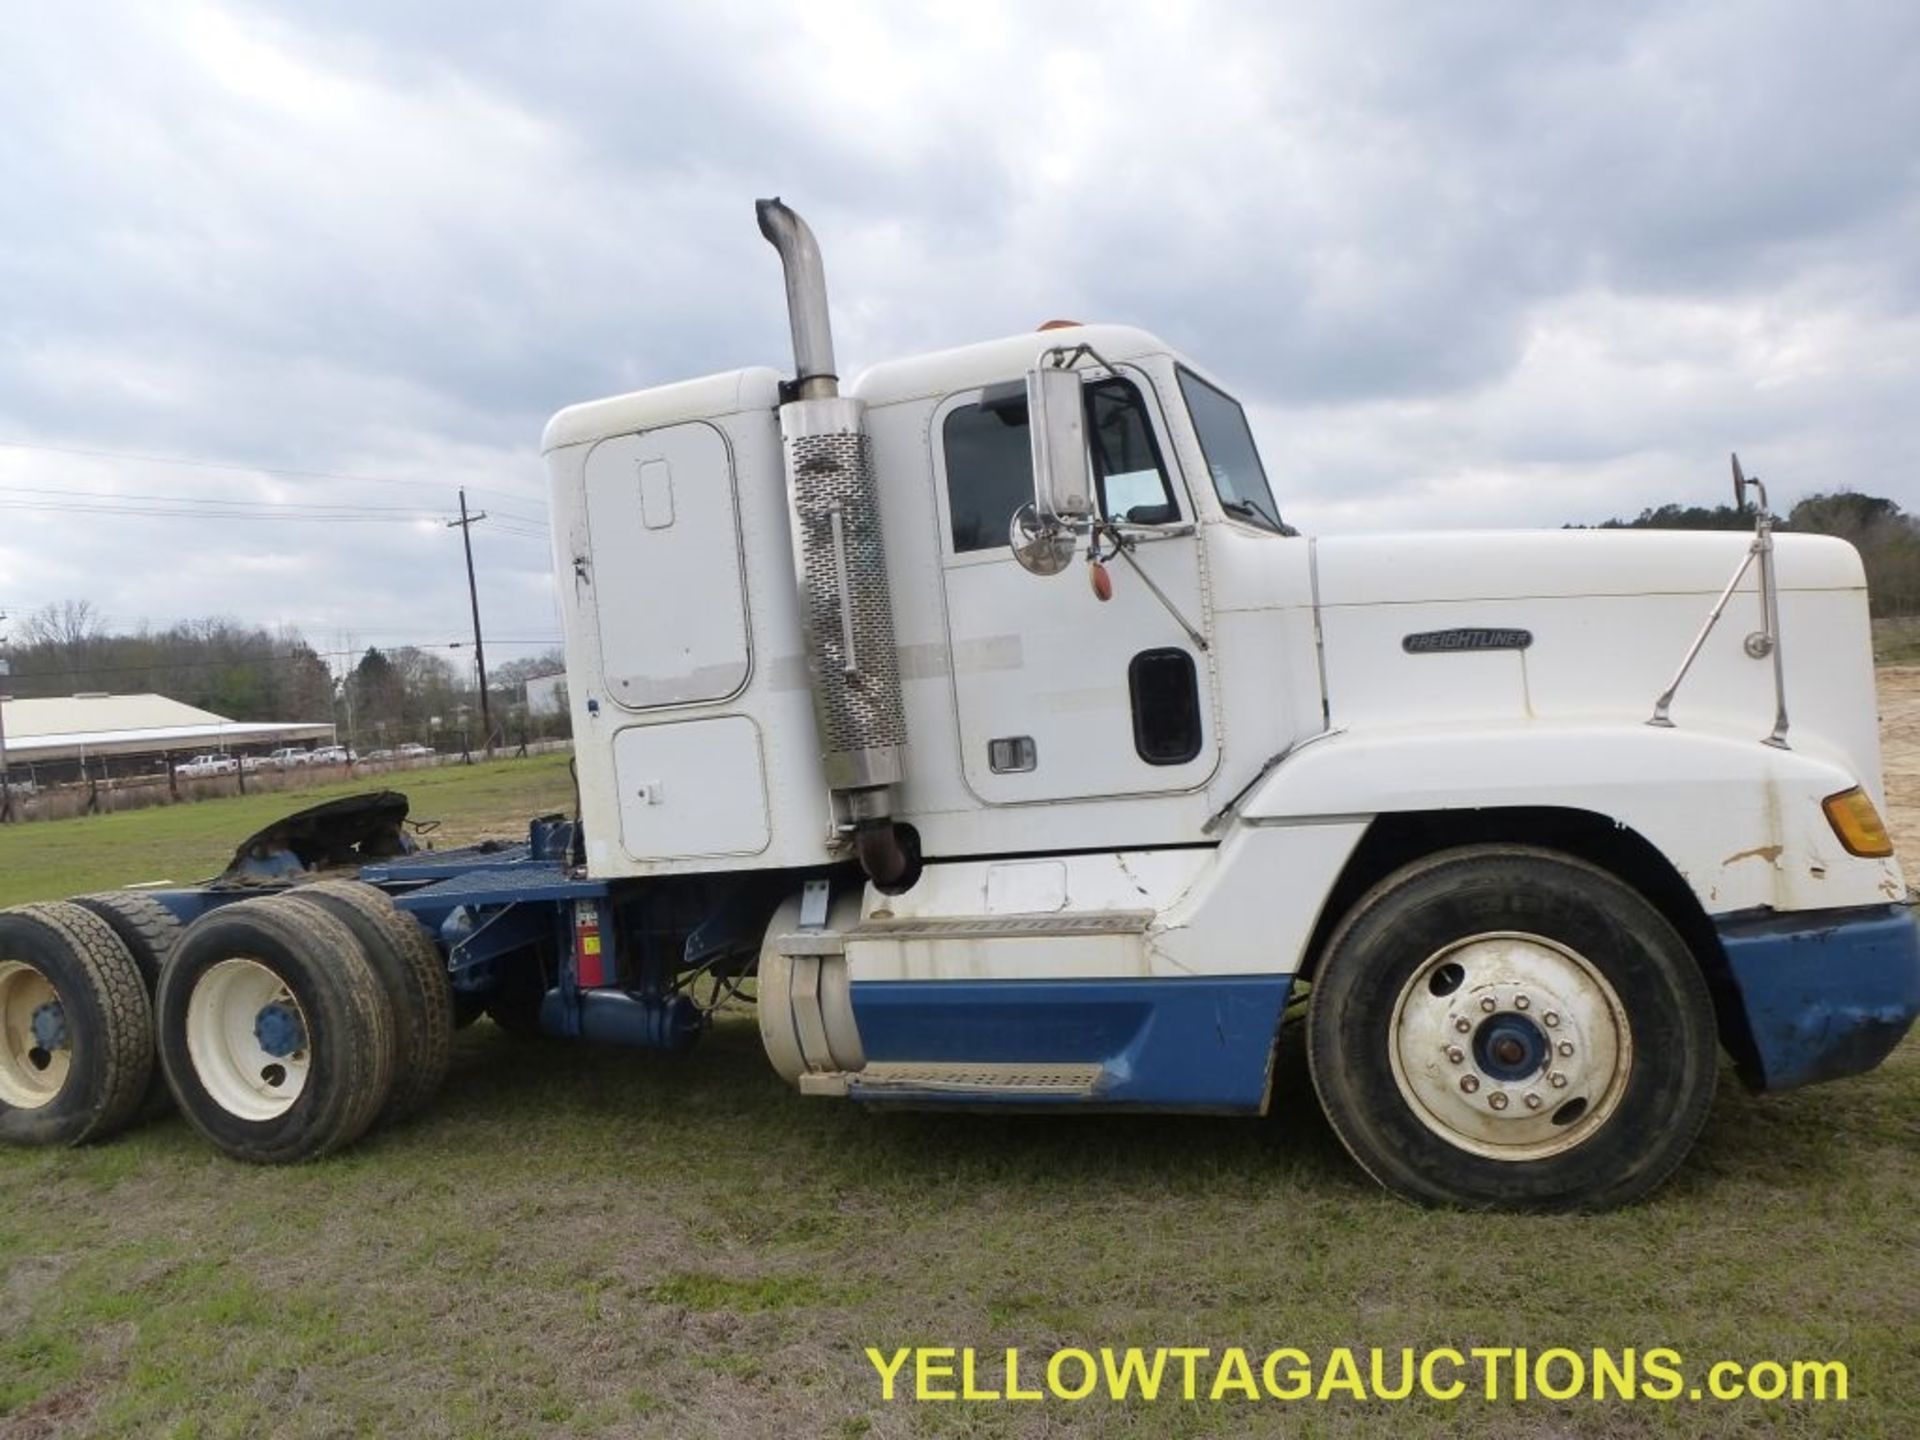 1989 Freightliner FLD 120 Truck Tractor|VIN #1FUYDCYBXKP338622;|Titled, Non-Taxable||Tag: 849 - Bild 3 aus 21